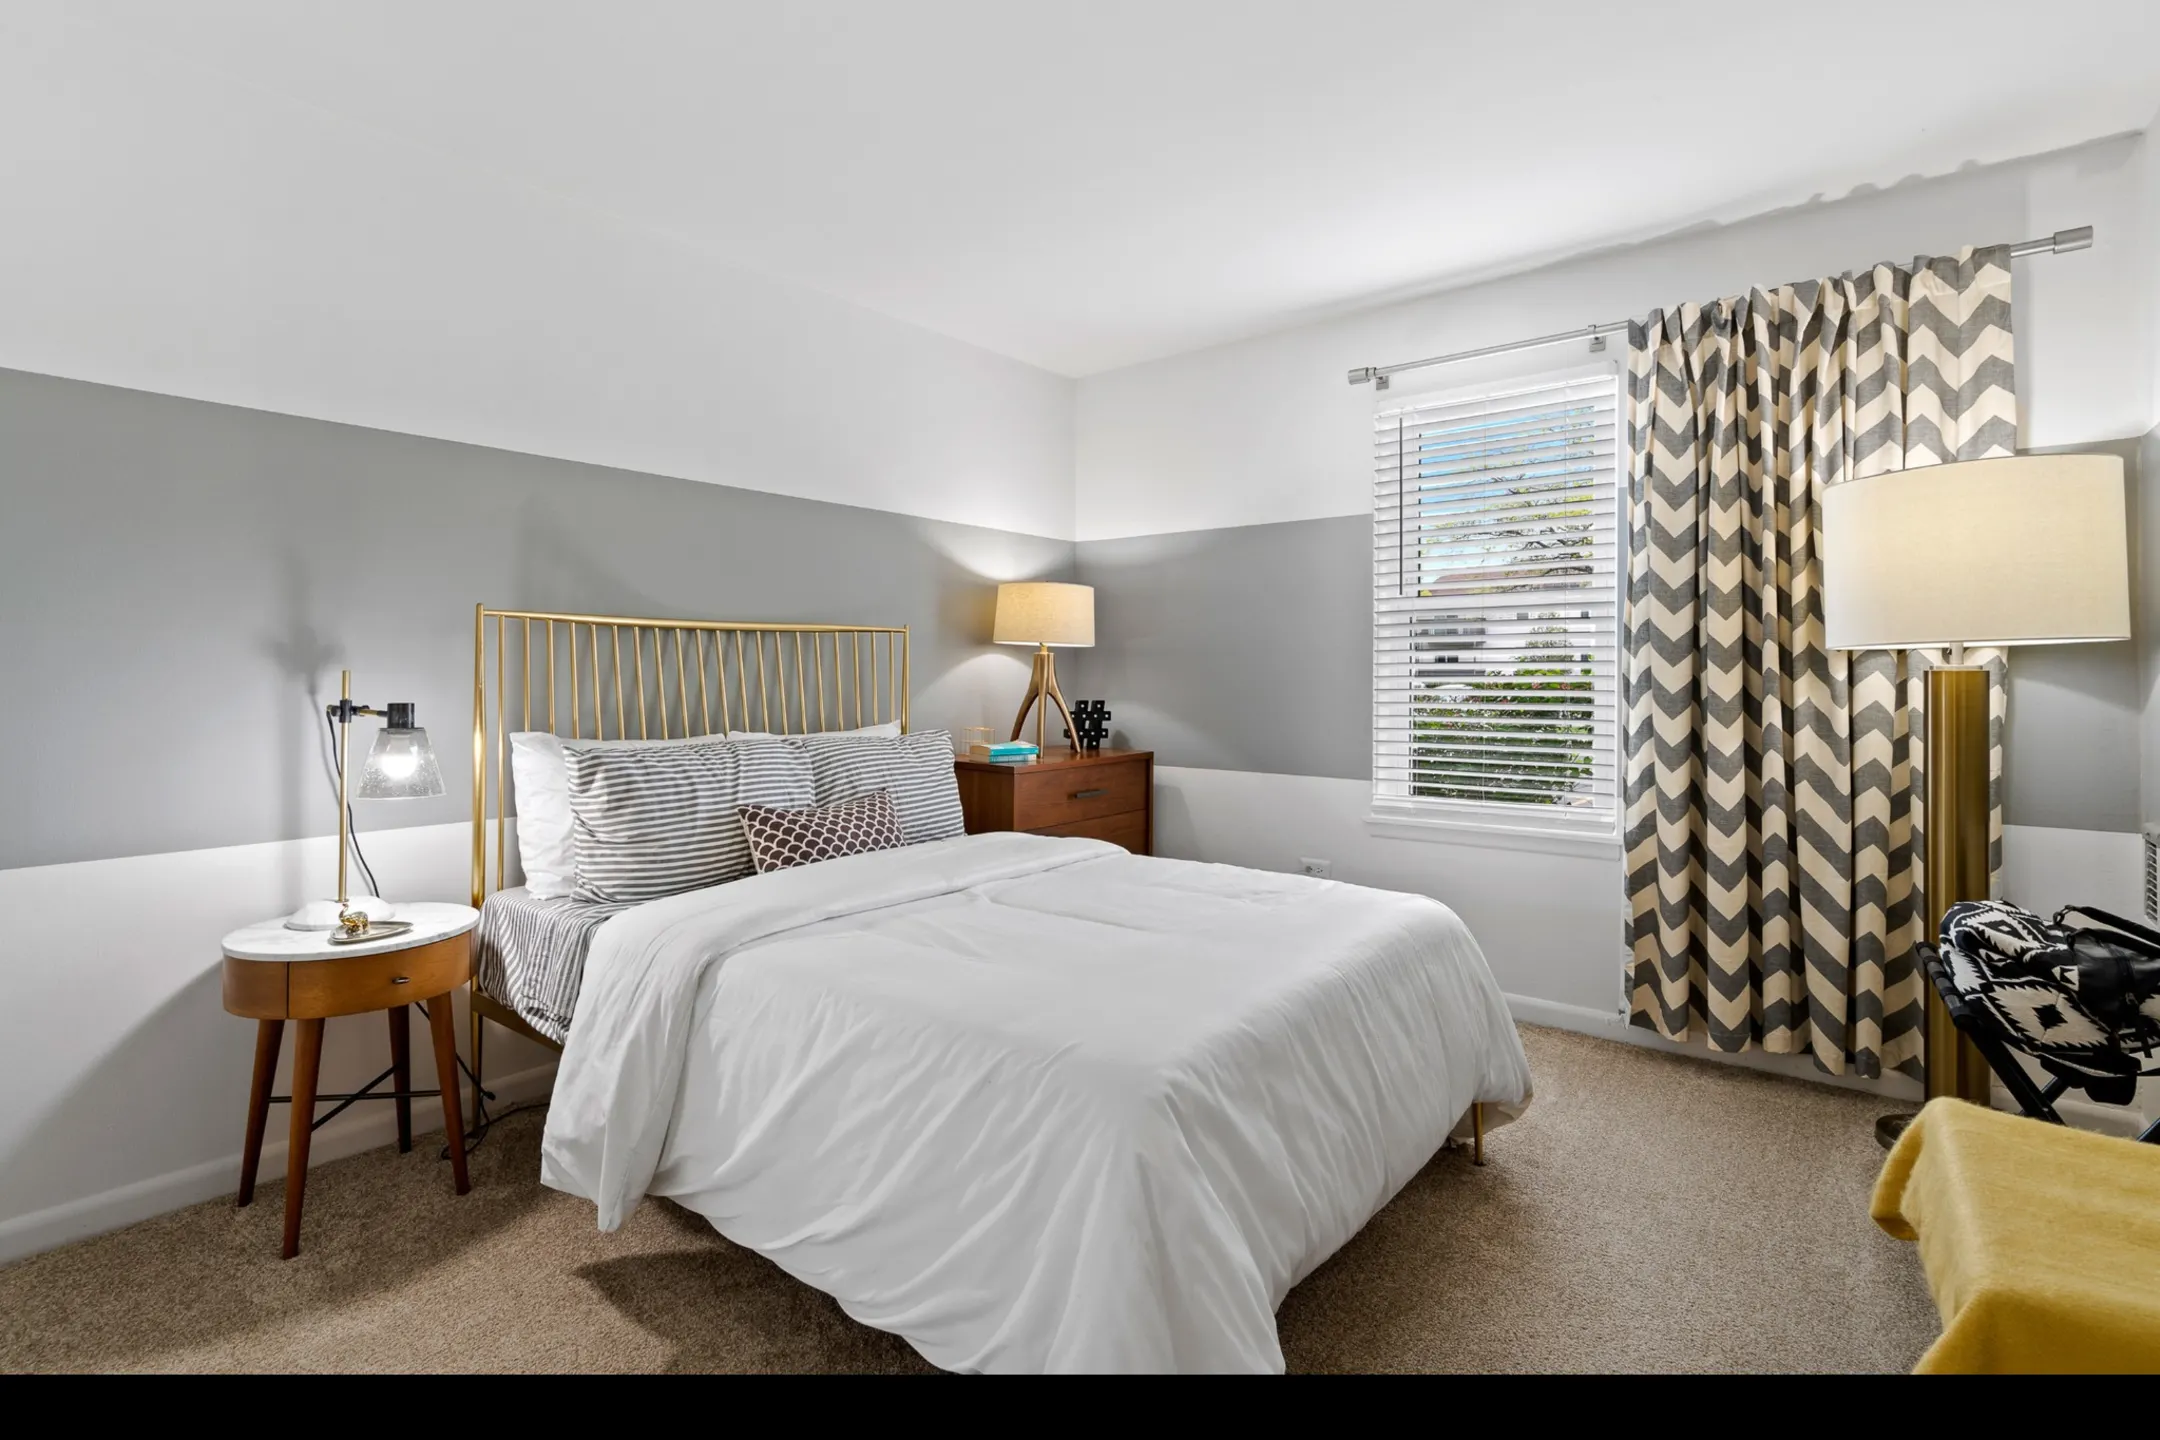 Bedroom - The Residence at Arlington Heights - Arlington Heights, IL